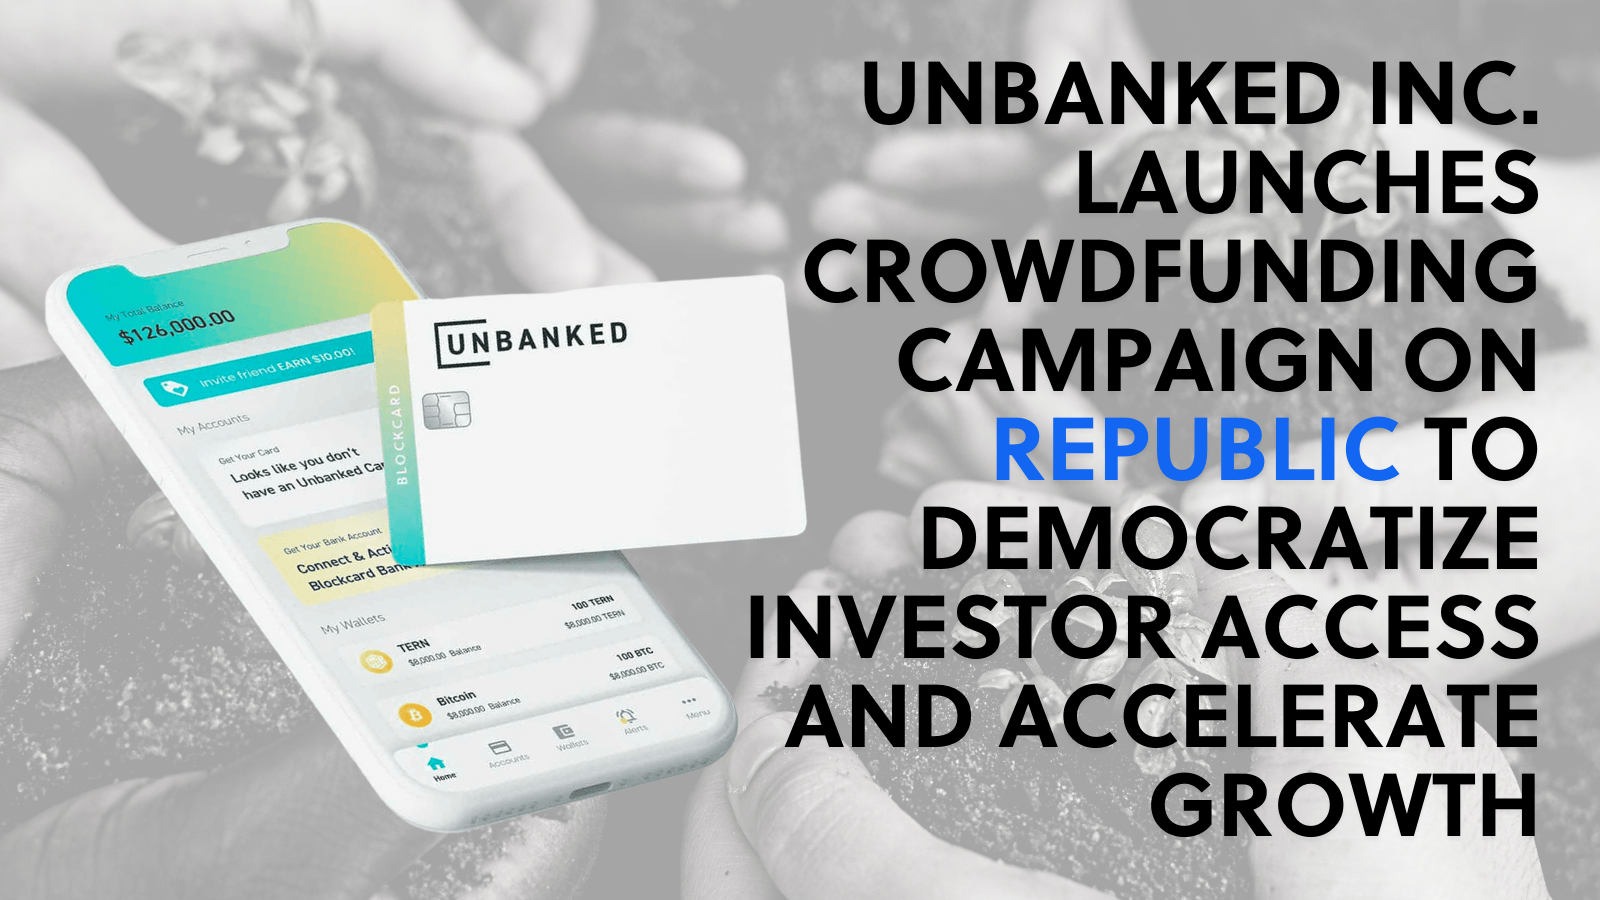 Unbanked Inc. Launches Crowdfunding Campaign on Republic to Democratize Investor Access and Accelerate Growth thumbnail